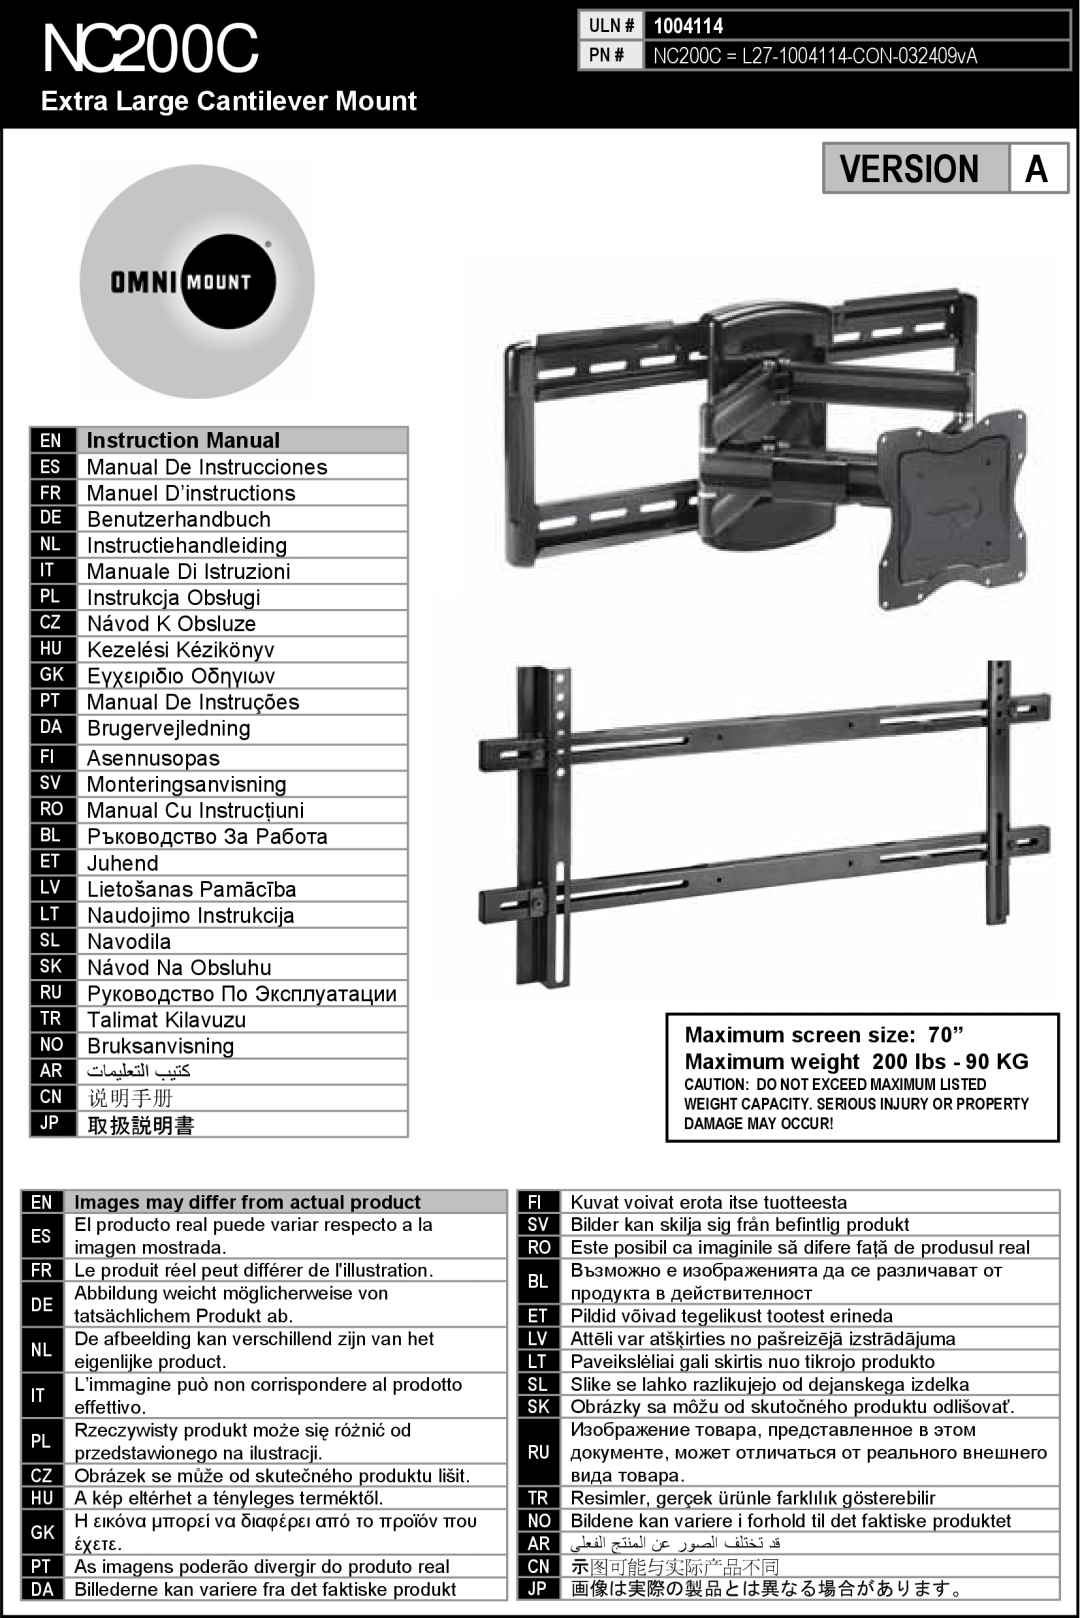 Omnimount 1004114 manual Version, Extra Large Cantilever Mount, Maximum screen size 70”, Maximum weight 200 lbs - 90 KG 